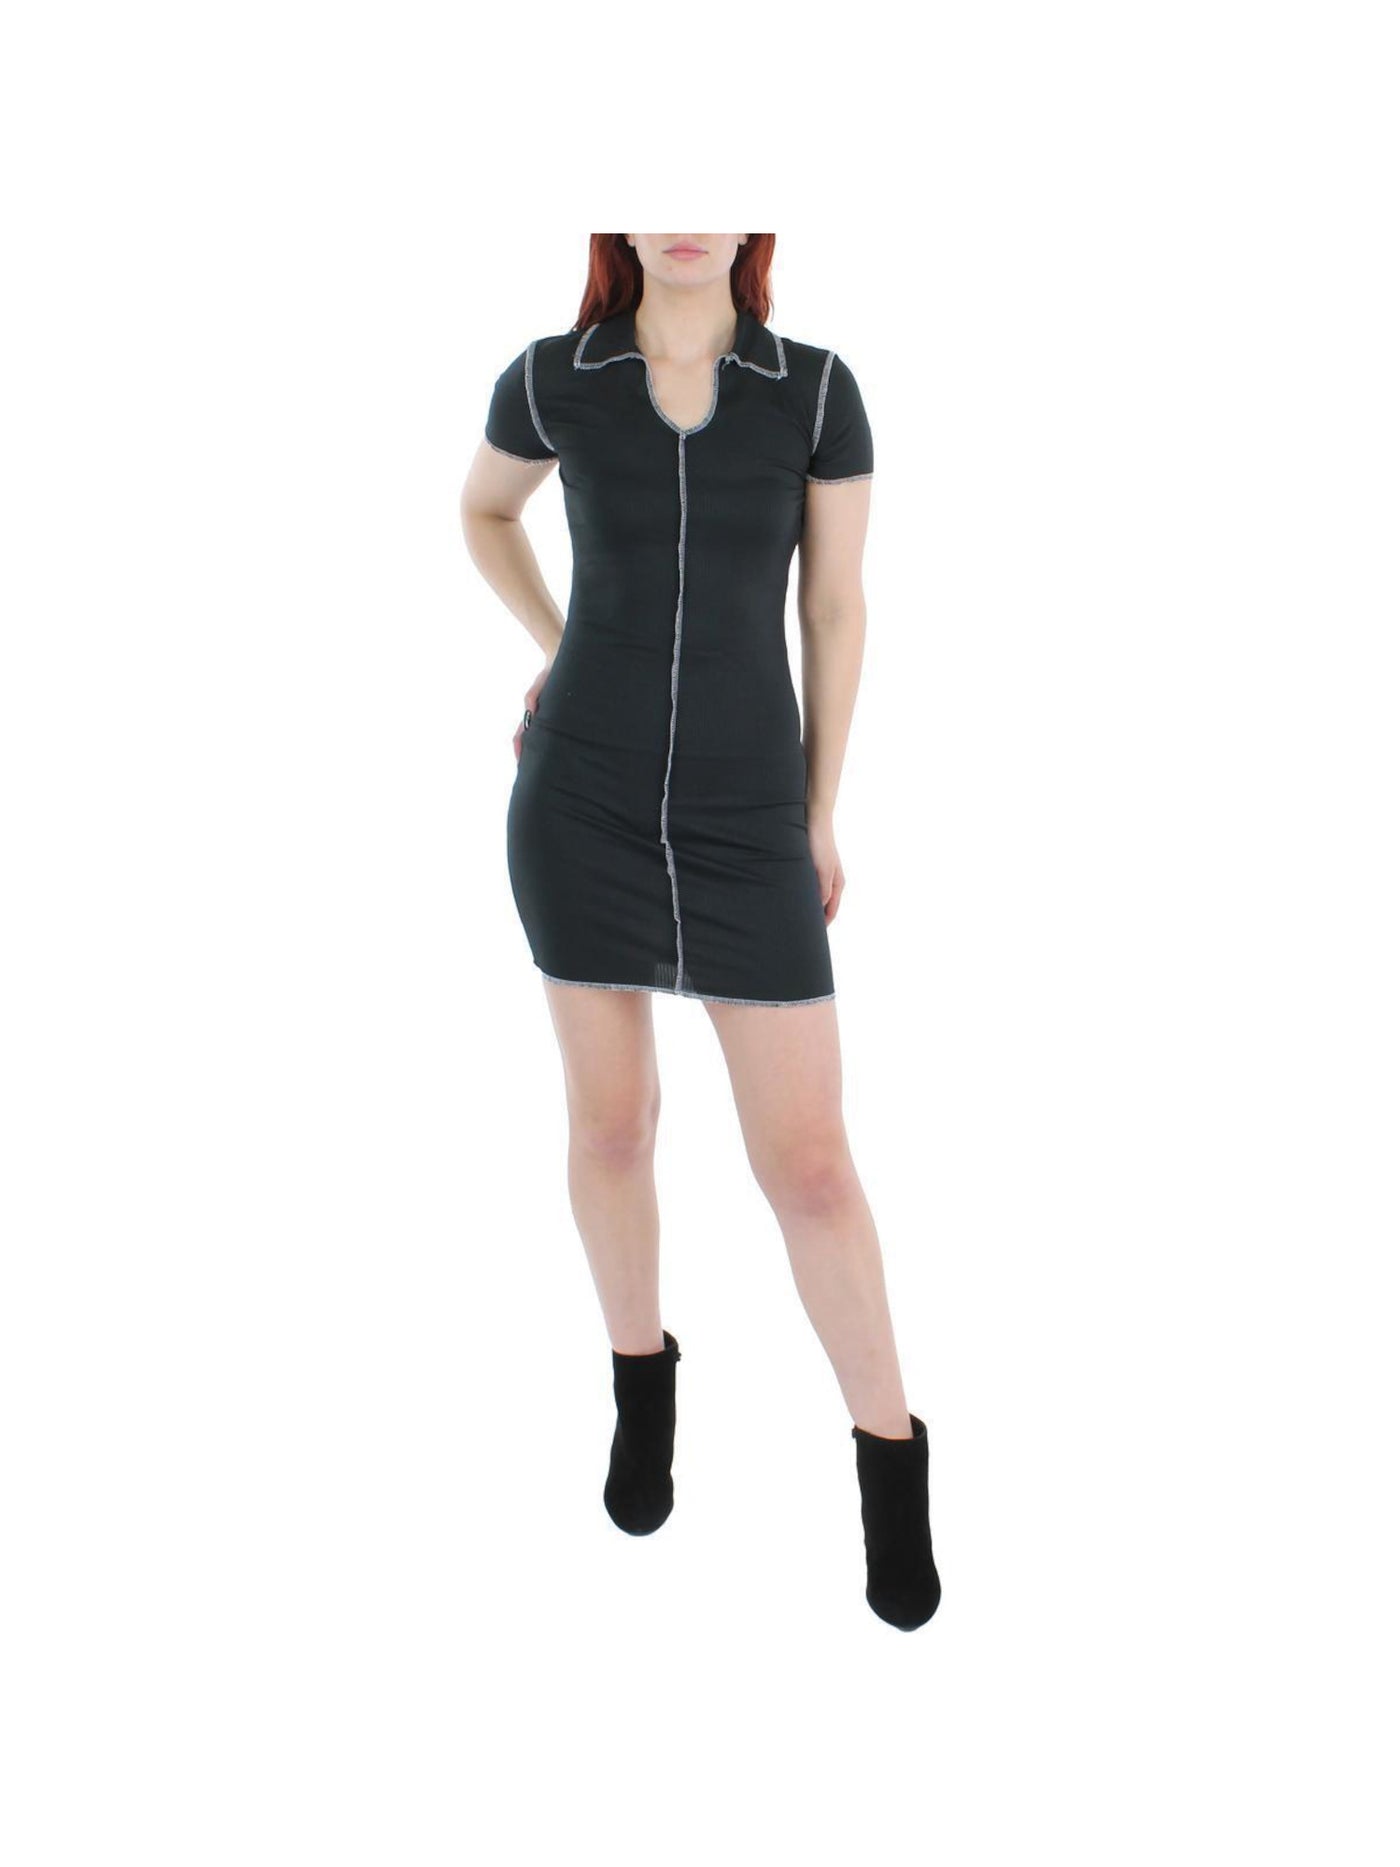 NO COMMENT Womens Black Ribbed Sheer Short Sleeve Collared Short Body Con Dress Juniors S